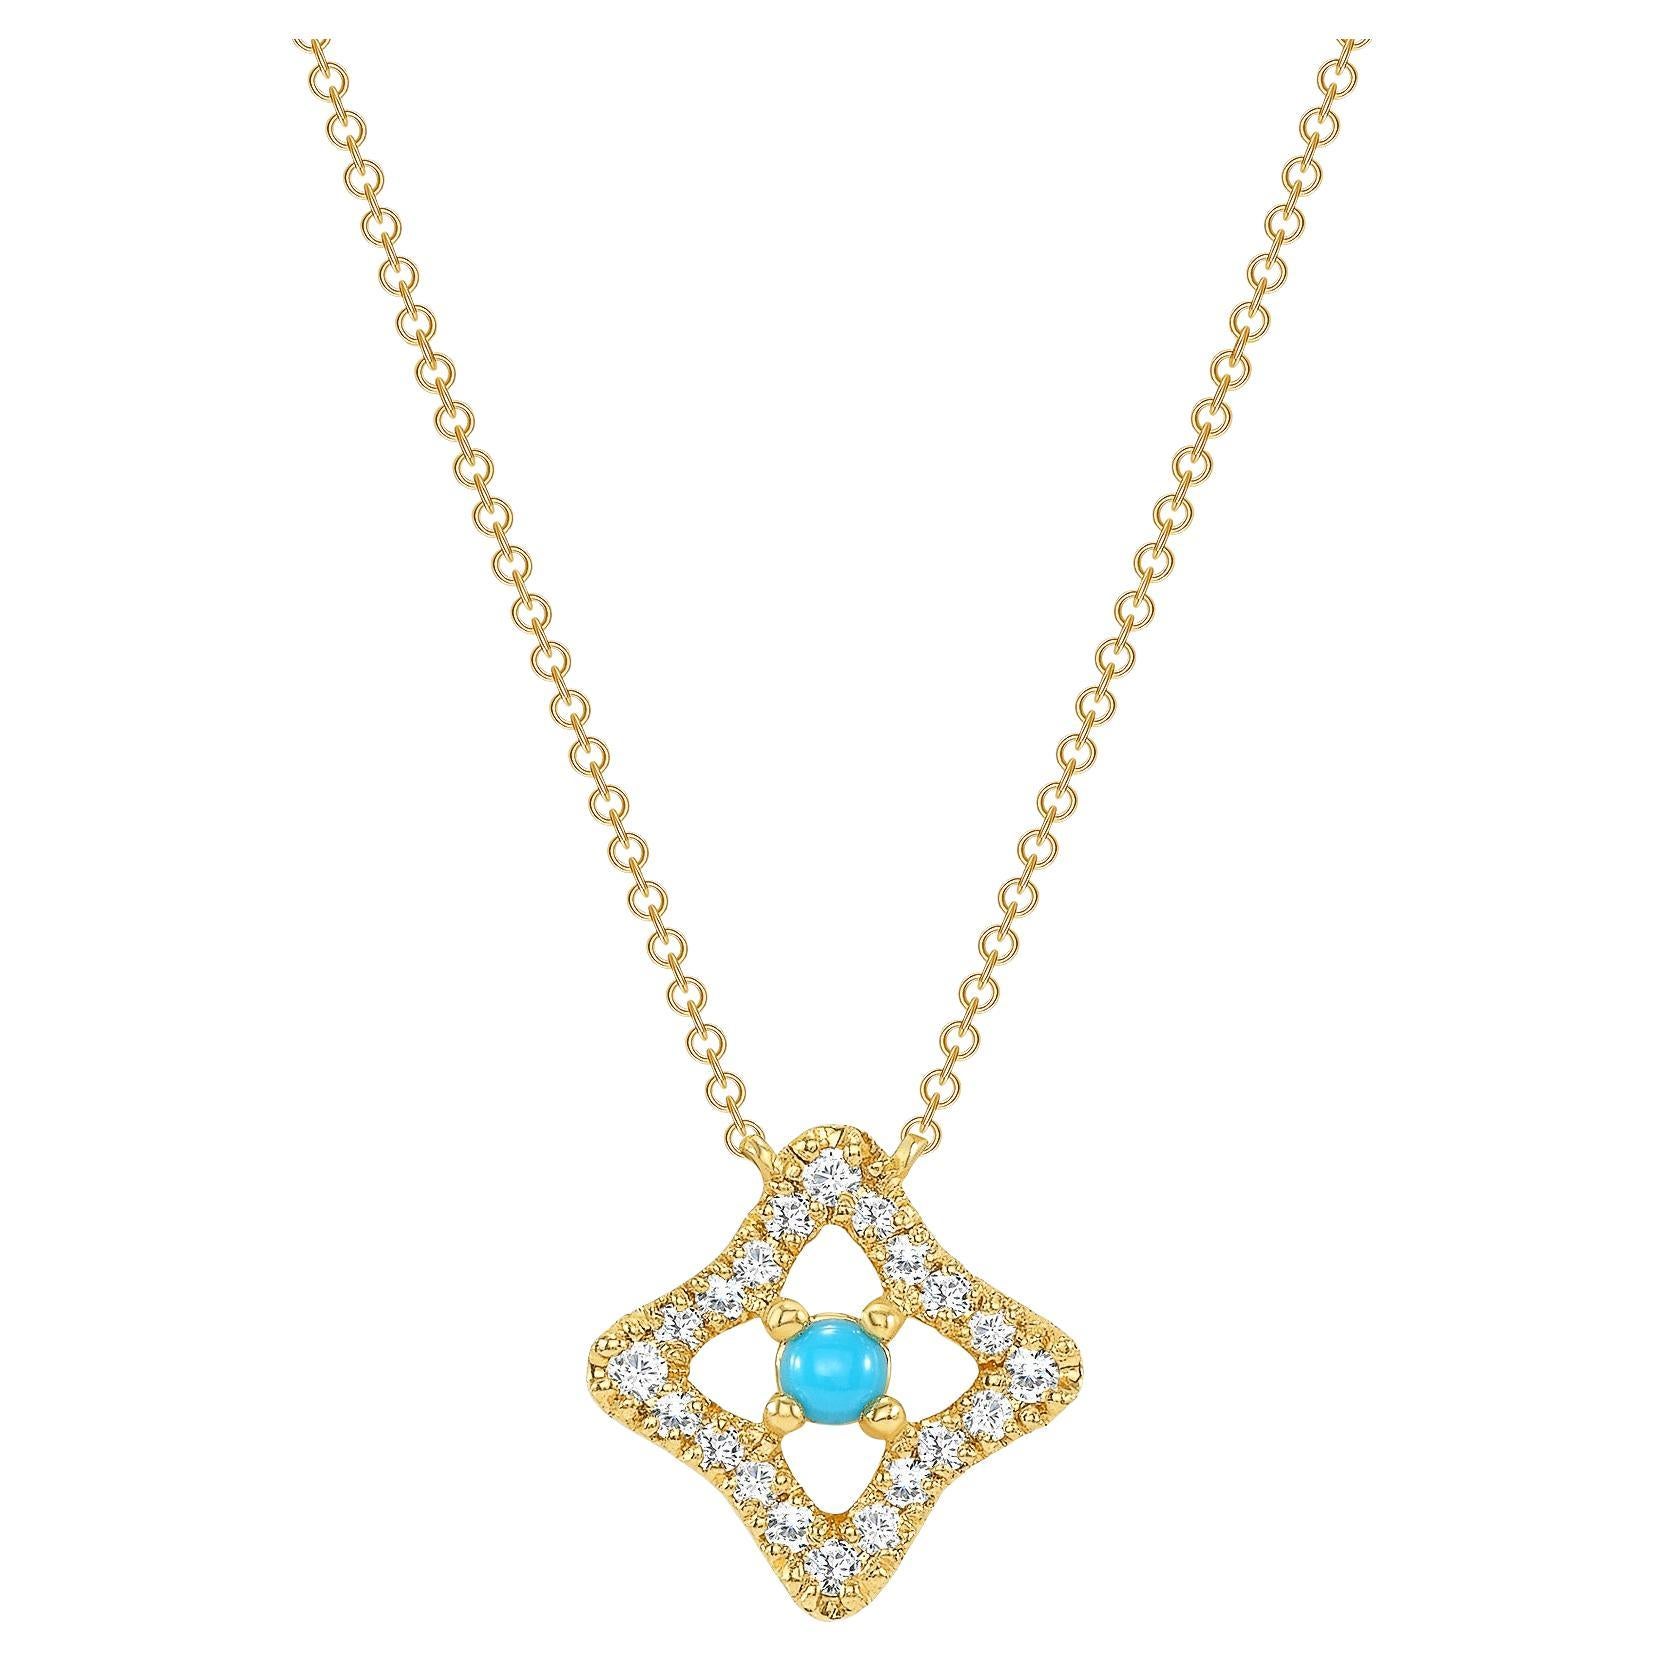 14K Yellow Gold Diamond & Turquoise Pendant Necklace For Sale